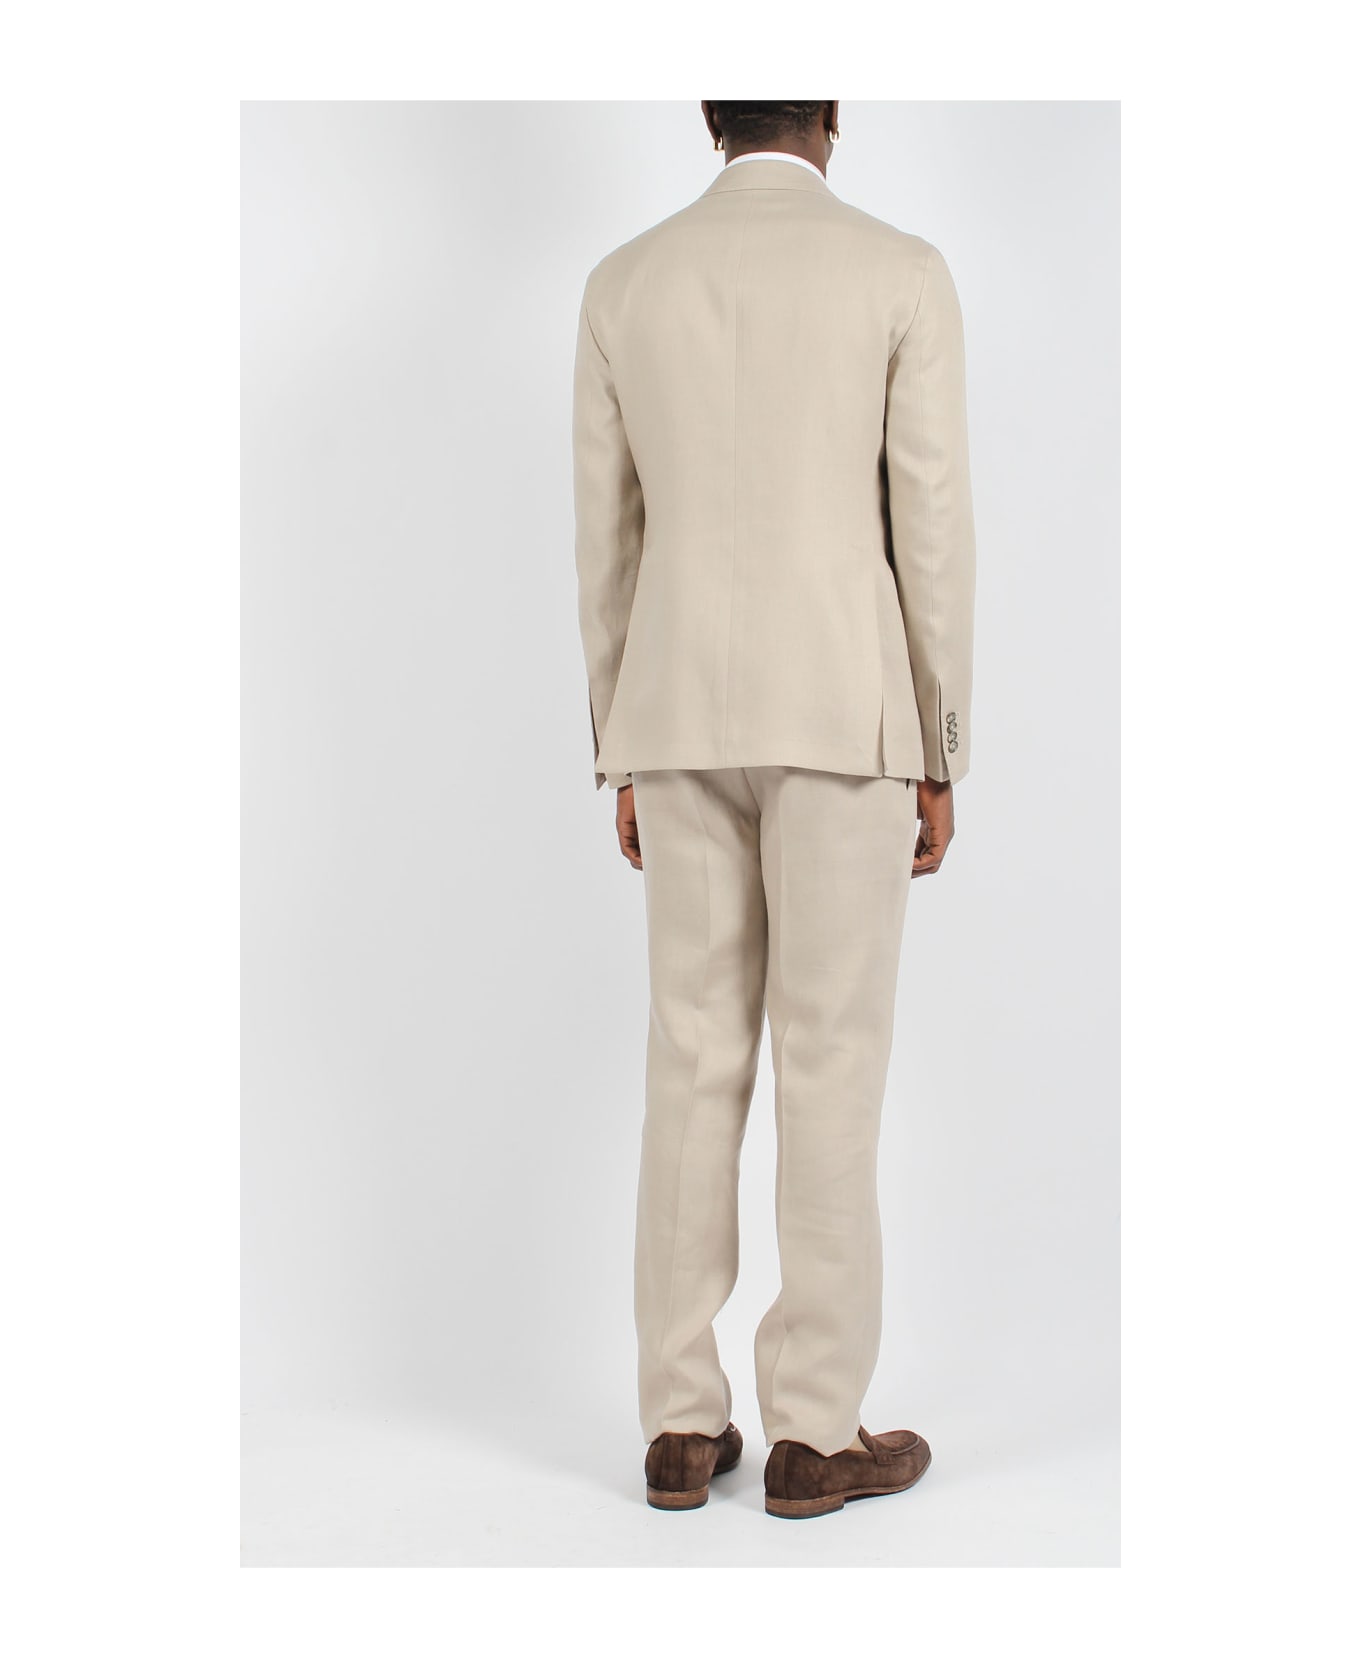 Tagliatore Linen Double-breasted Tailored Suit - Nude & Neutrals